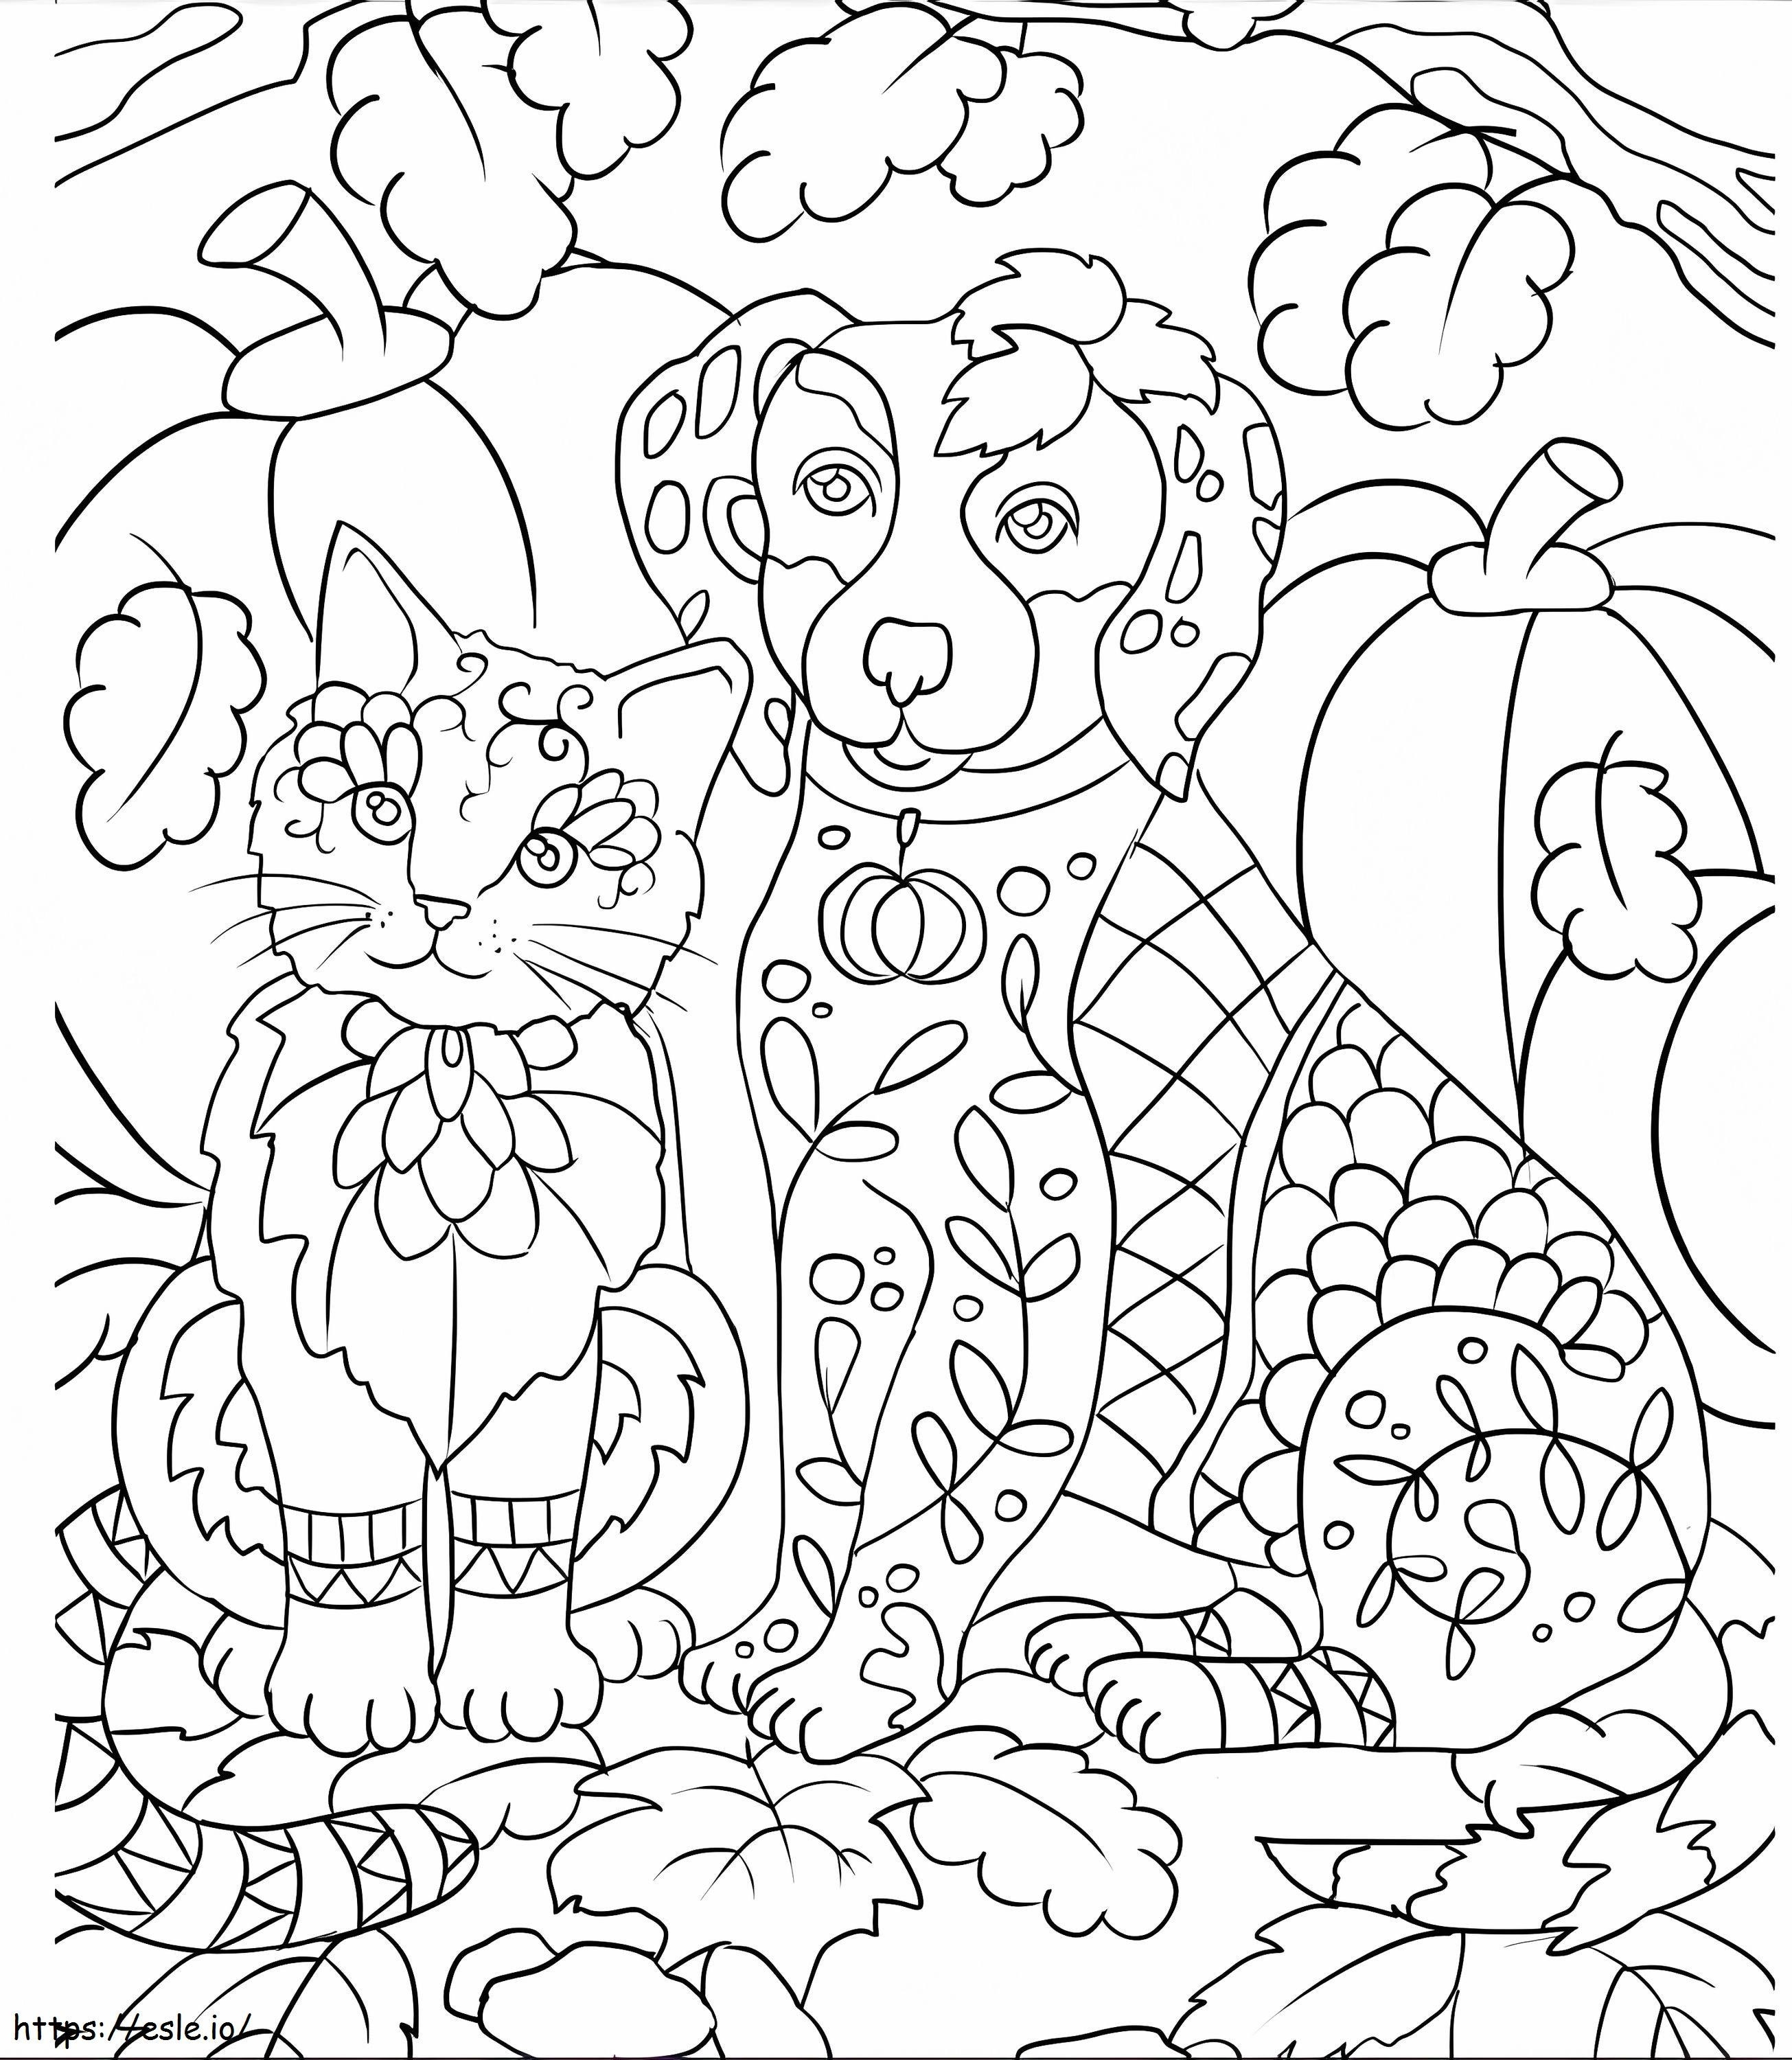 Dog And Cat For Adults coloring page